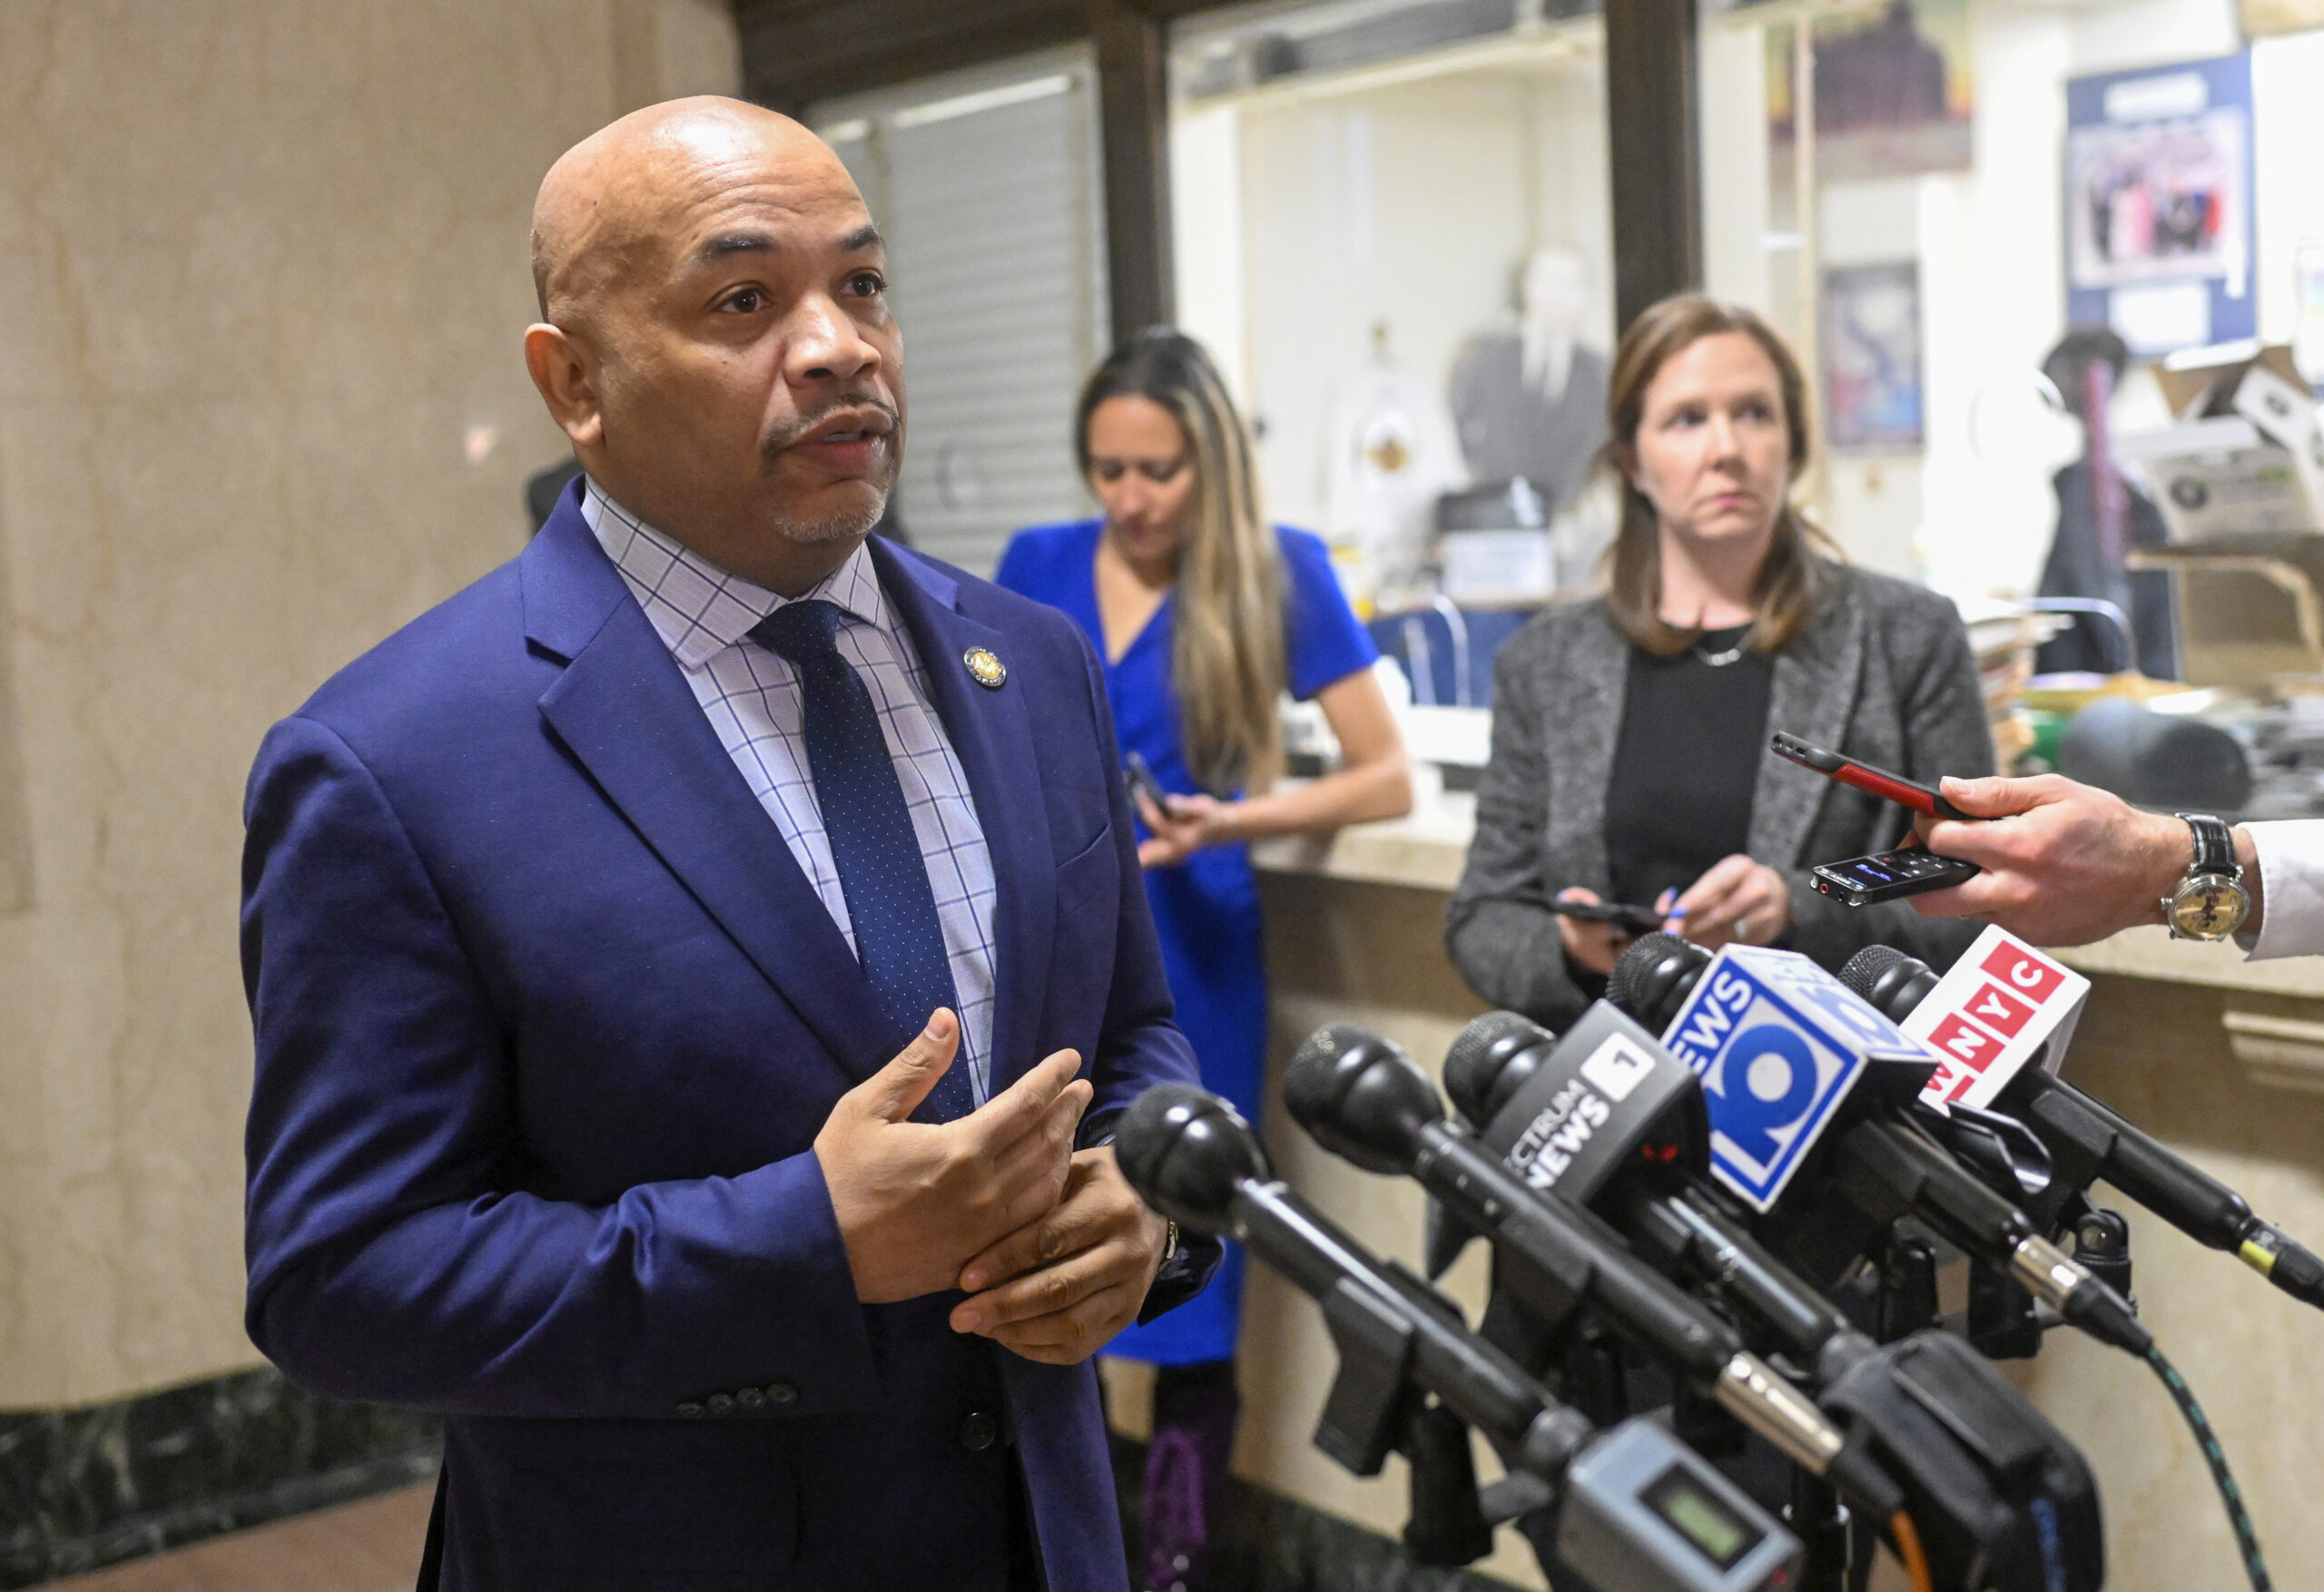 Assembly Speaker Carl Heastie updated reporters this afternoon on the state of budget talks for the fiscal year that starts April 1.